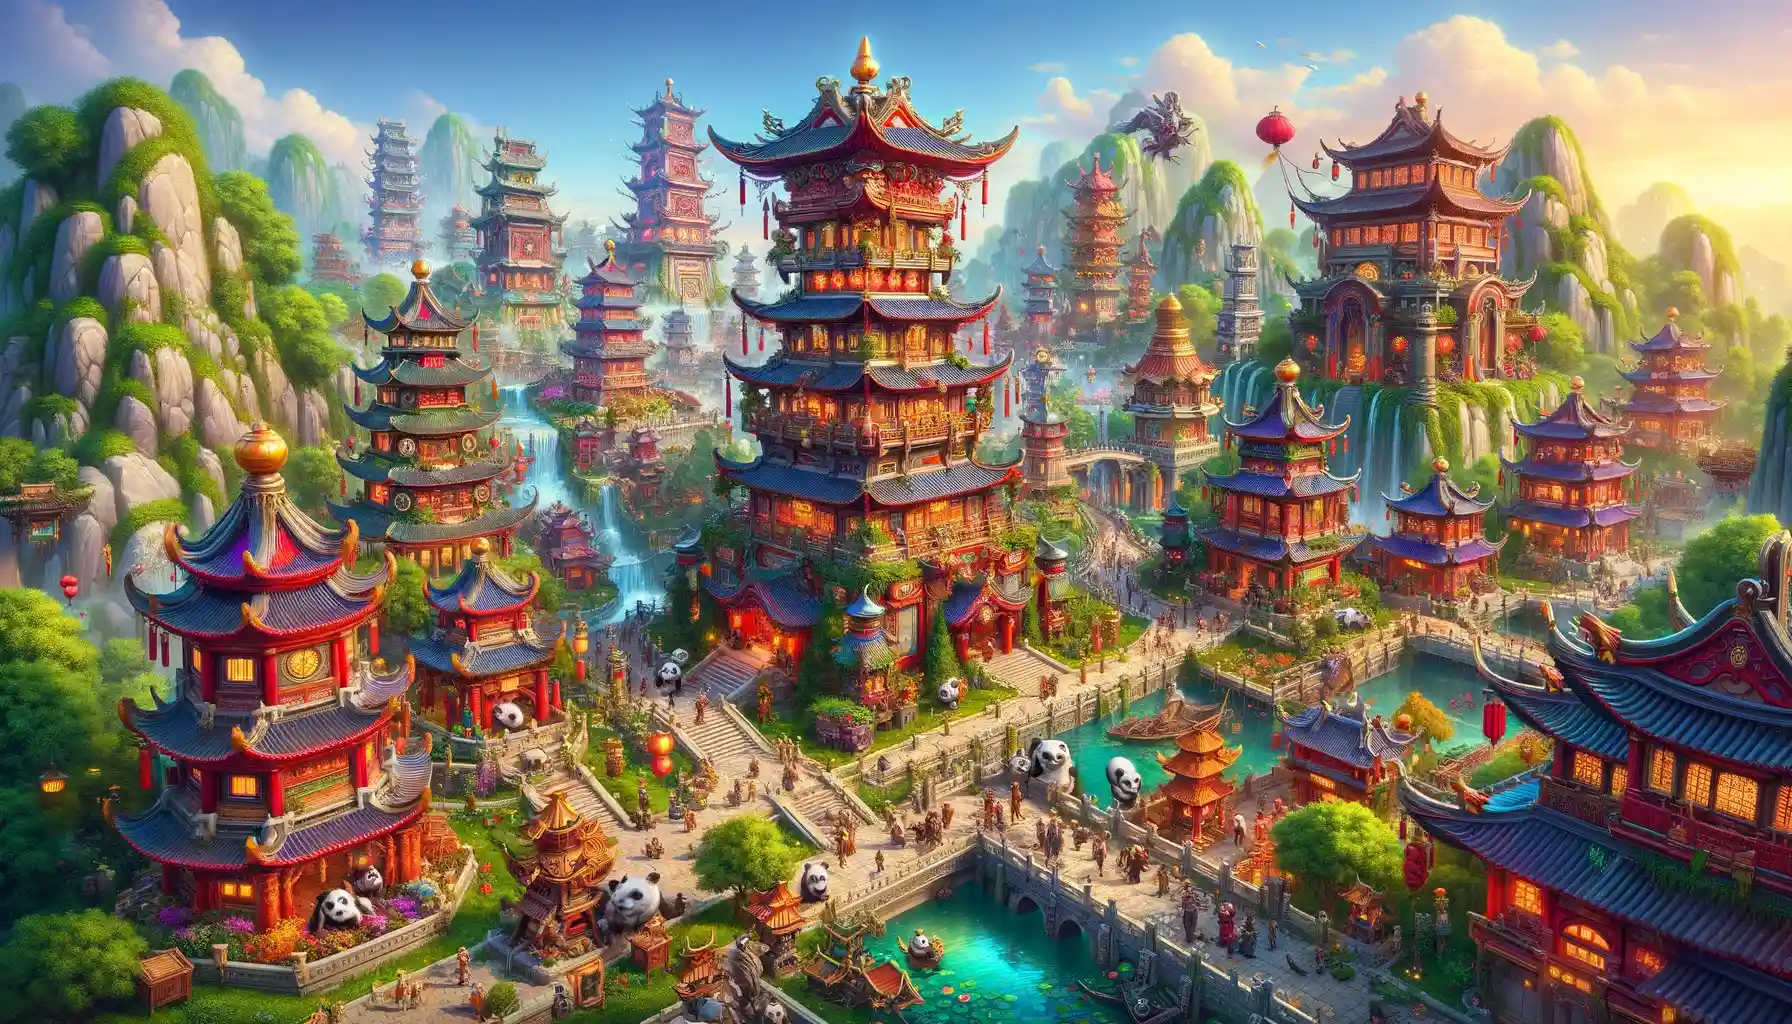 The Epic Return Of World Of Warcraft To China: Everything You Need To Know!